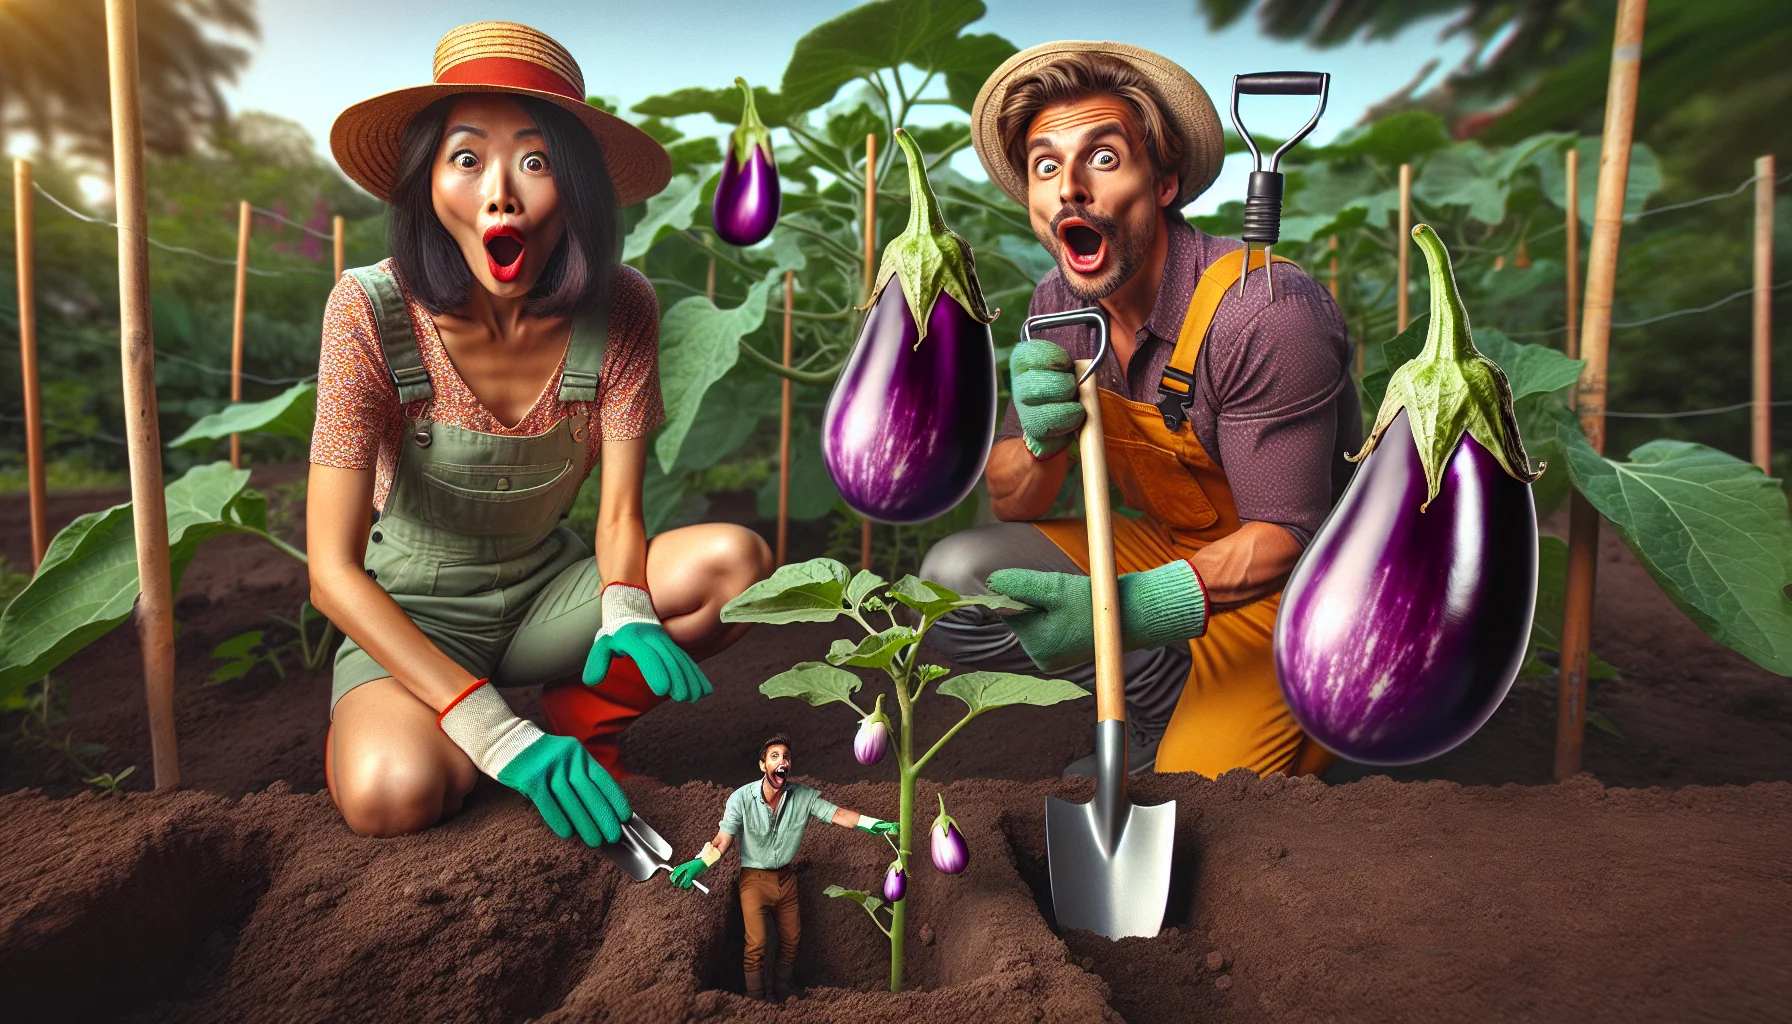 Create a vibrant and realistic image showcasing a highly humorous scenario of gardening. Show a Caucasian man and a South Asian woman working together to plant seeds in a garden. They're wearing colorful gardening attire, complete with gloves and hats. They hold a tiny spade and a pack of eggplant seeds with a look of exaggerated shock and surprise, as if they believe a huge eggplant will sprout immediately after planting the seeds. Behind them, an eggplant plant is already bearing oversized, ripe, and shiny eggplants ready to be harvested, adding to the comedy of the situation. Illustrate the joy and fun of growing your own produce to entice people to enjoy gardening.